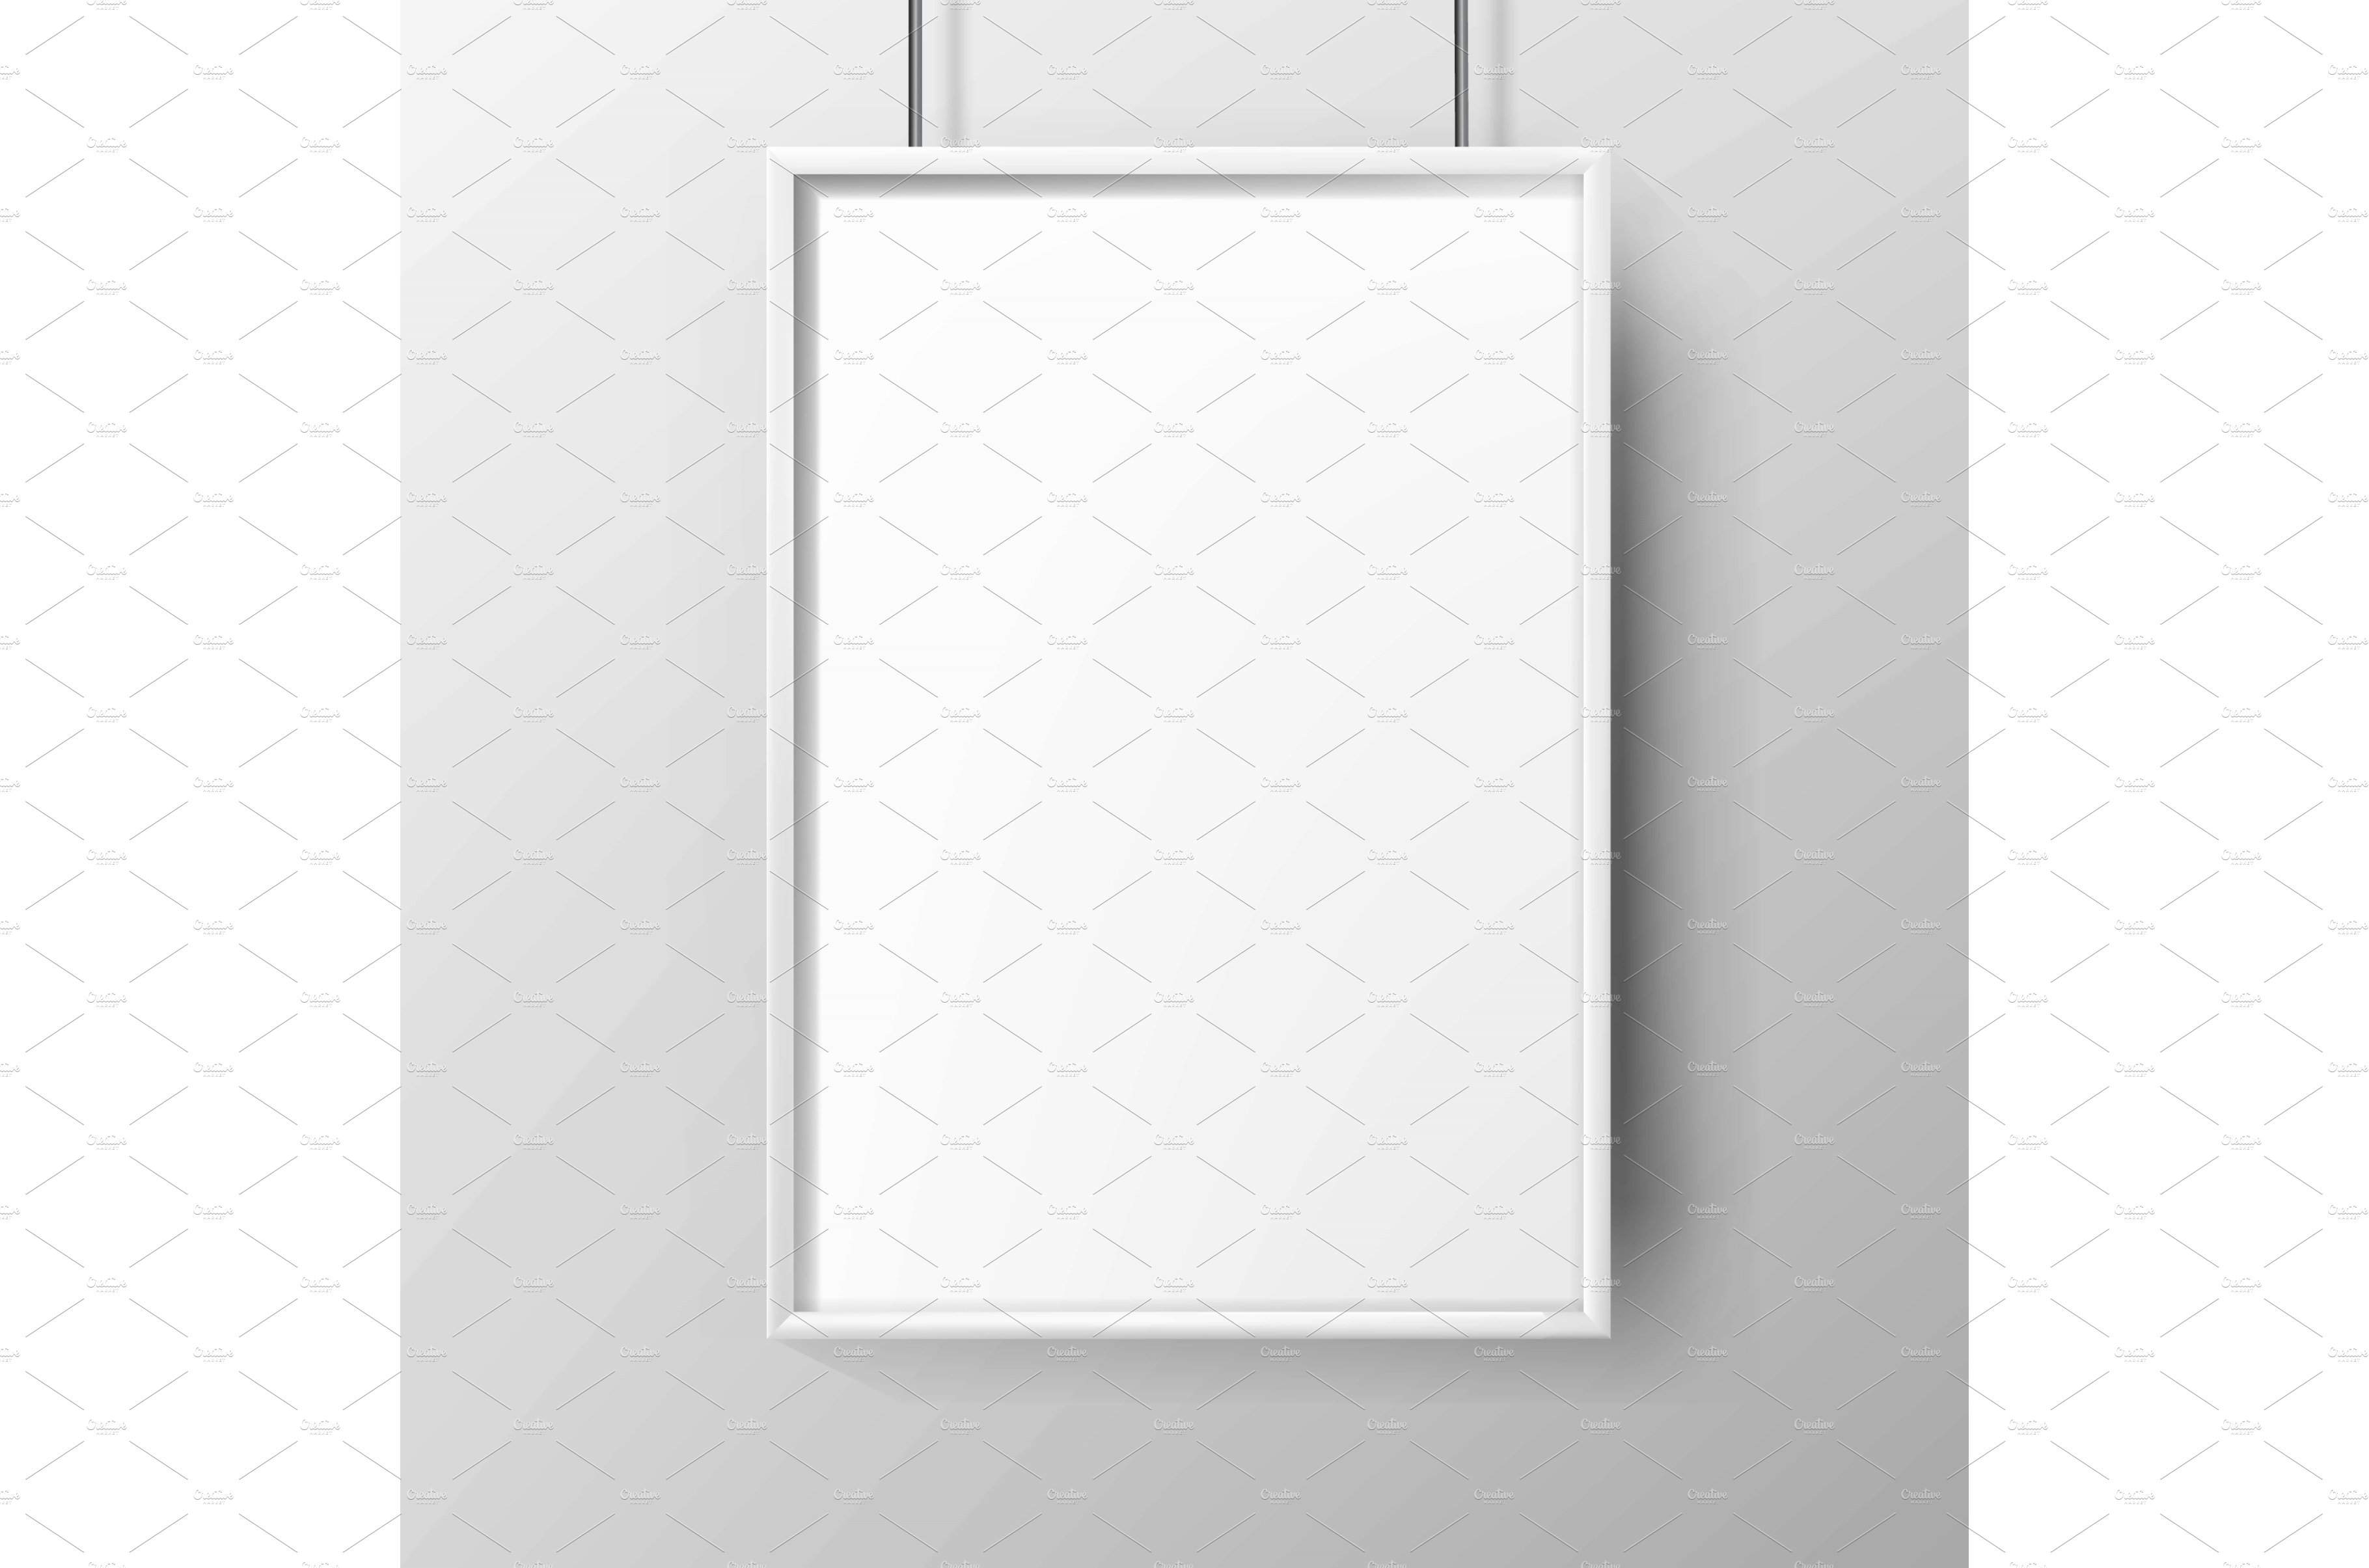 Poster Blank Advertising Paper With cover image.